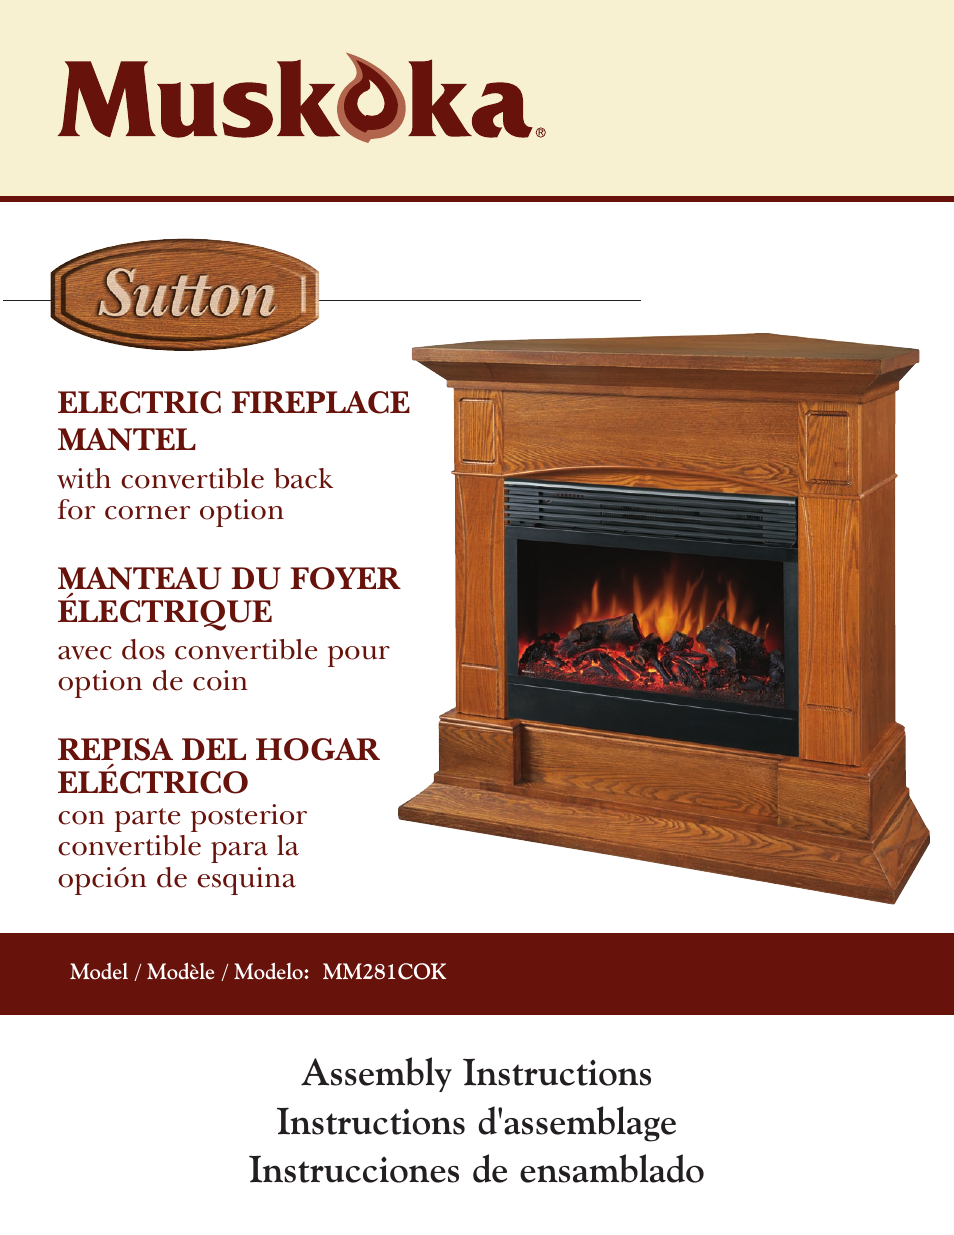 Electric Fireplace Mantel MM281COK